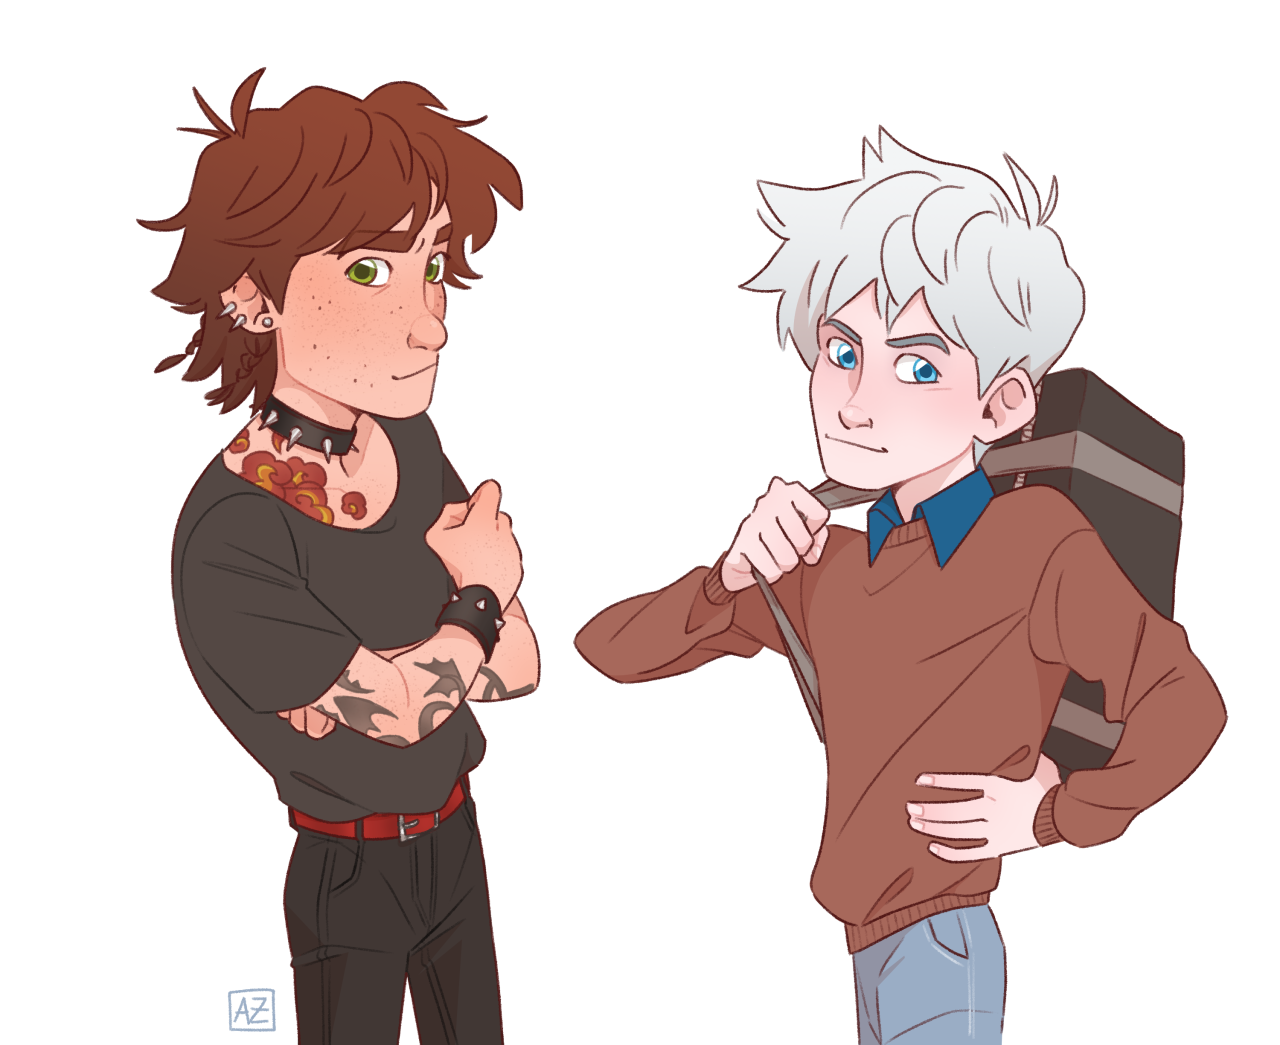 Hiccup Fetish